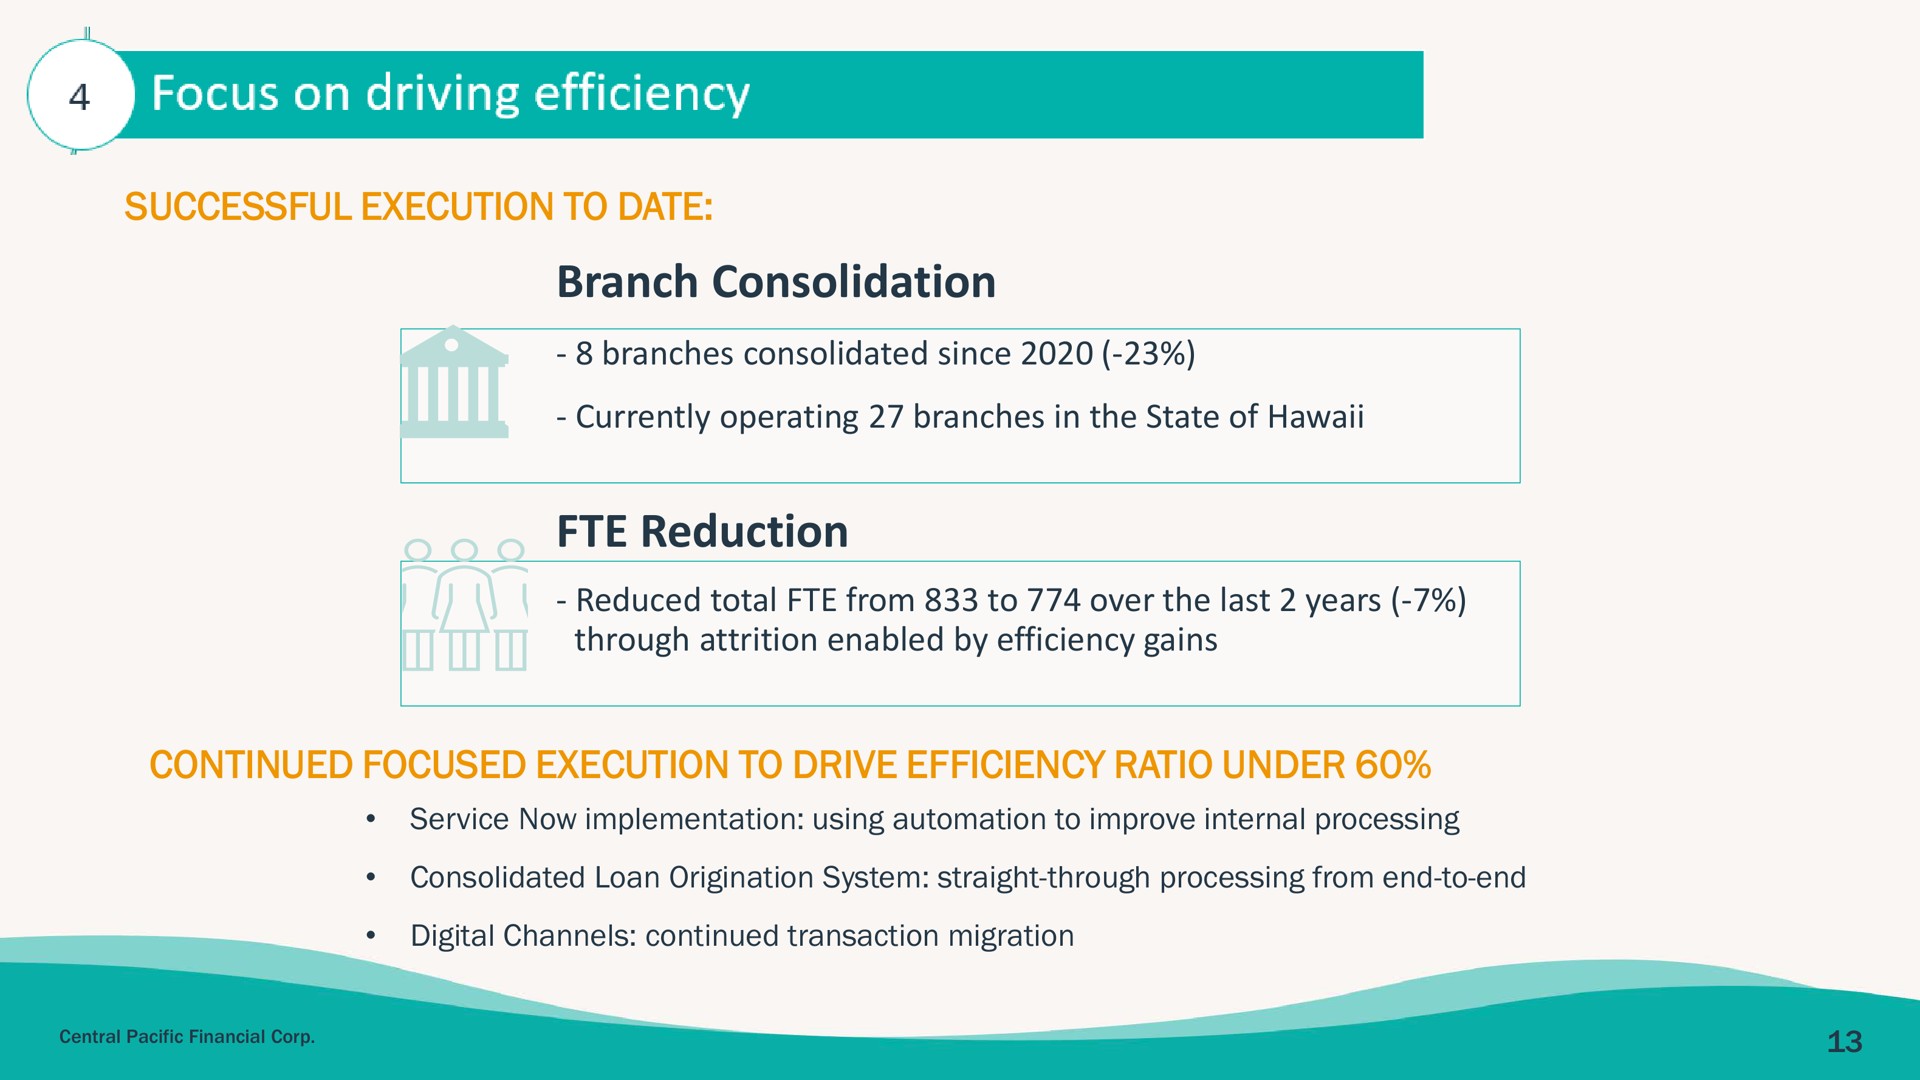 branch consolidation reduction | Central Pacific Financial